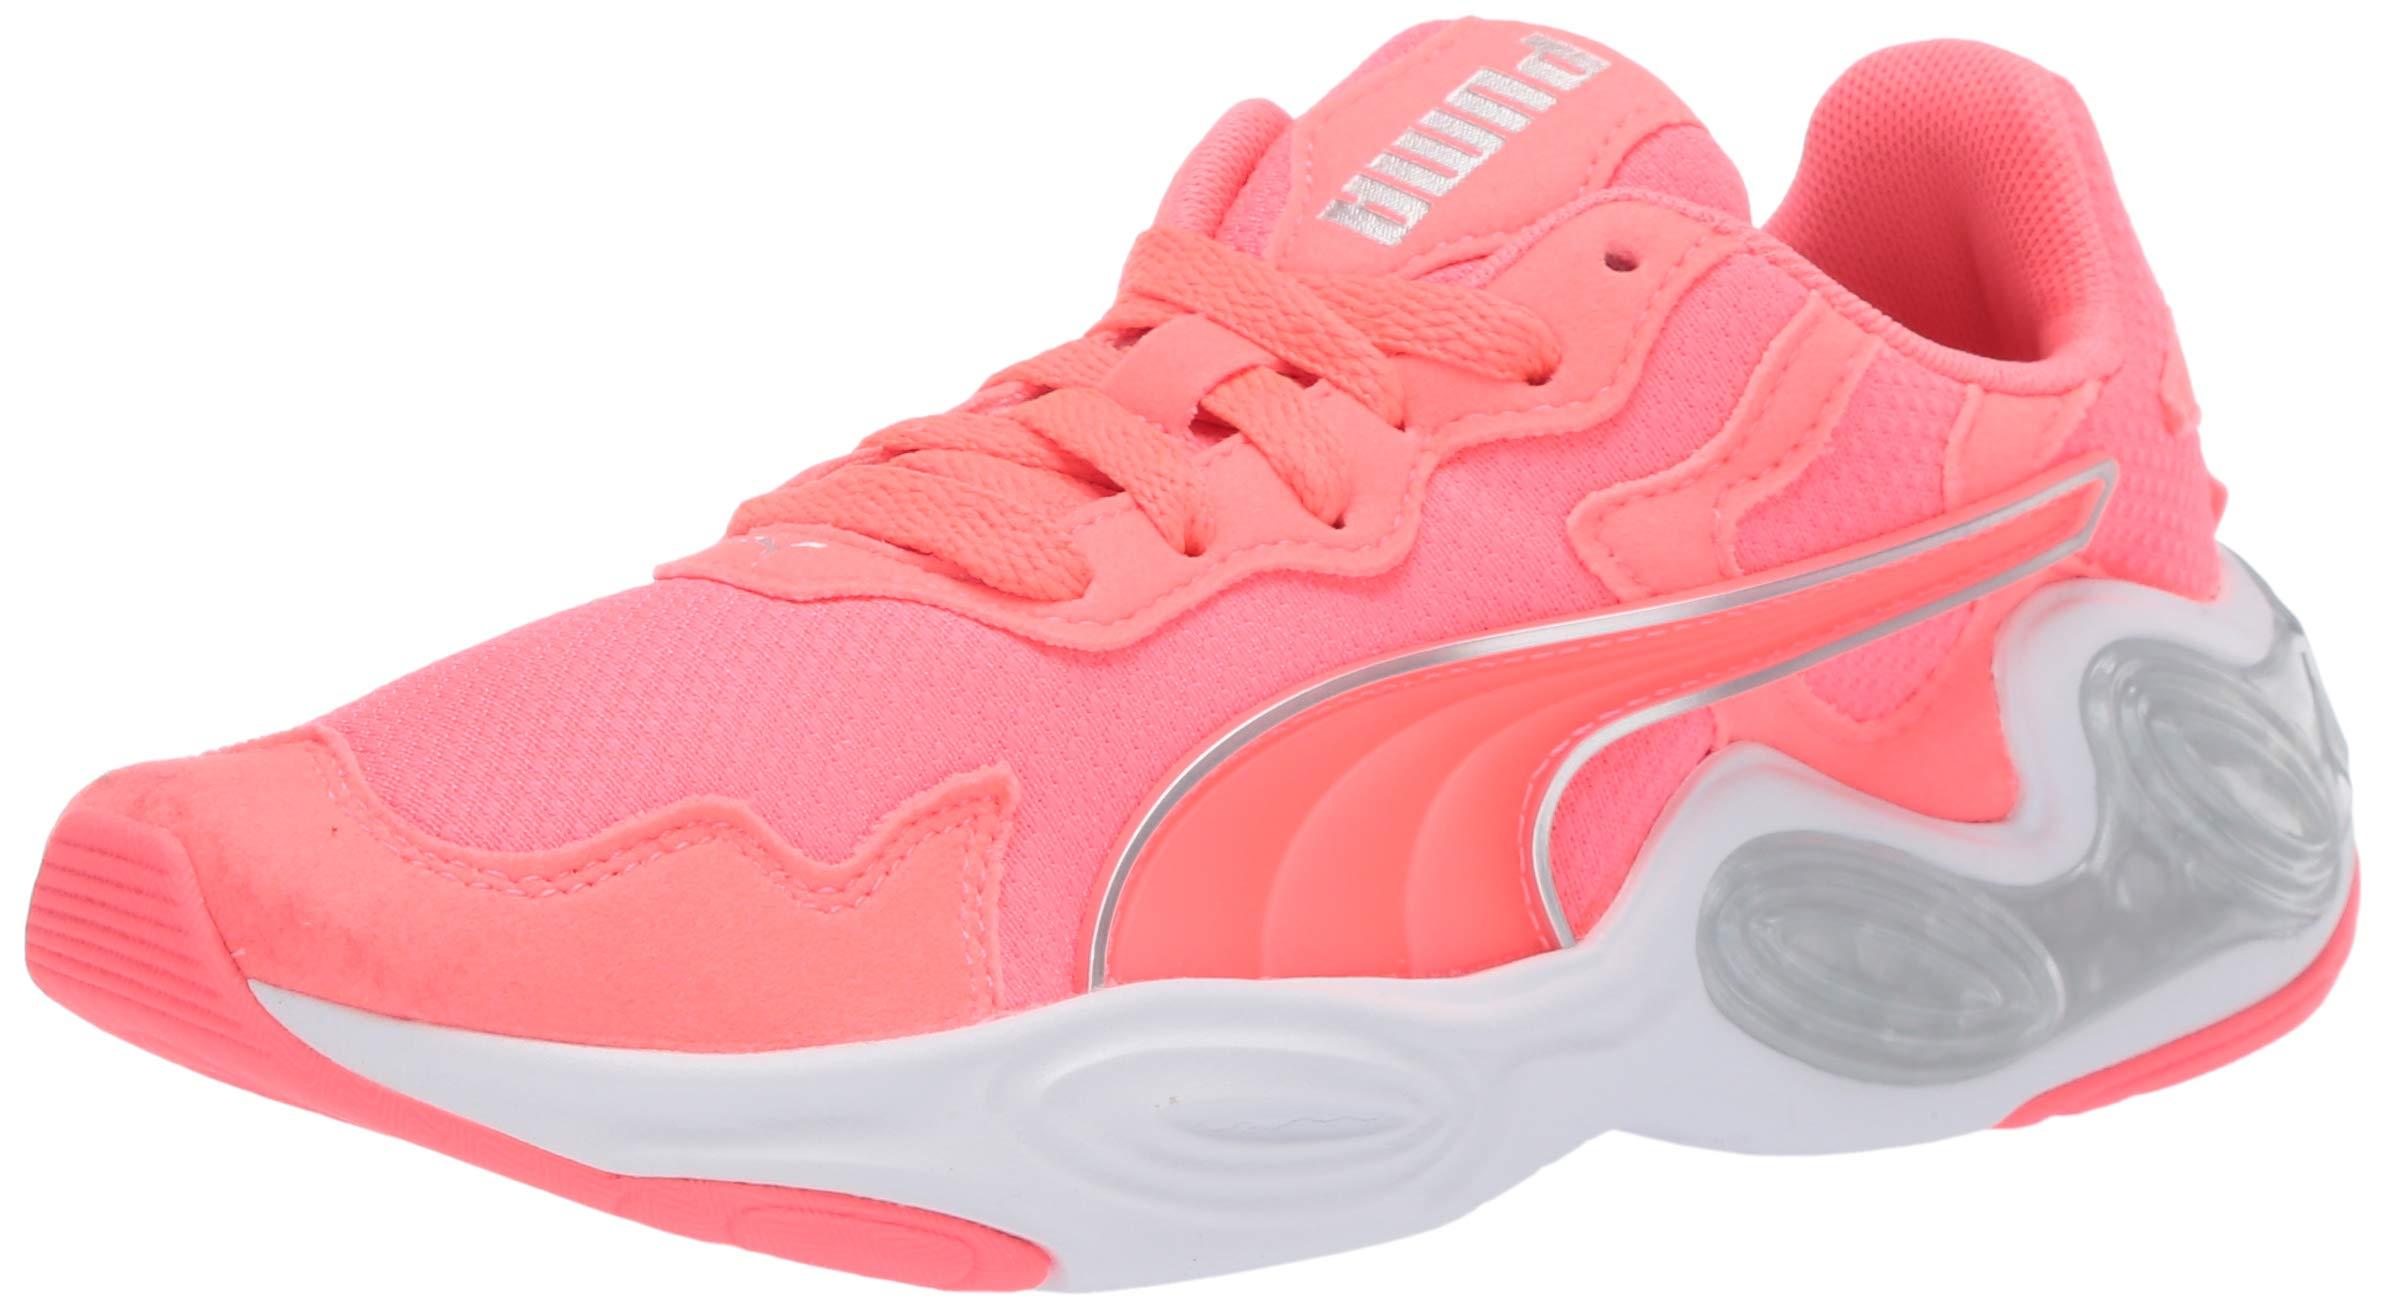 PUMA Rubber Cell Magma Wns in Neon Pink (Pink) - Save 68% | Lyst